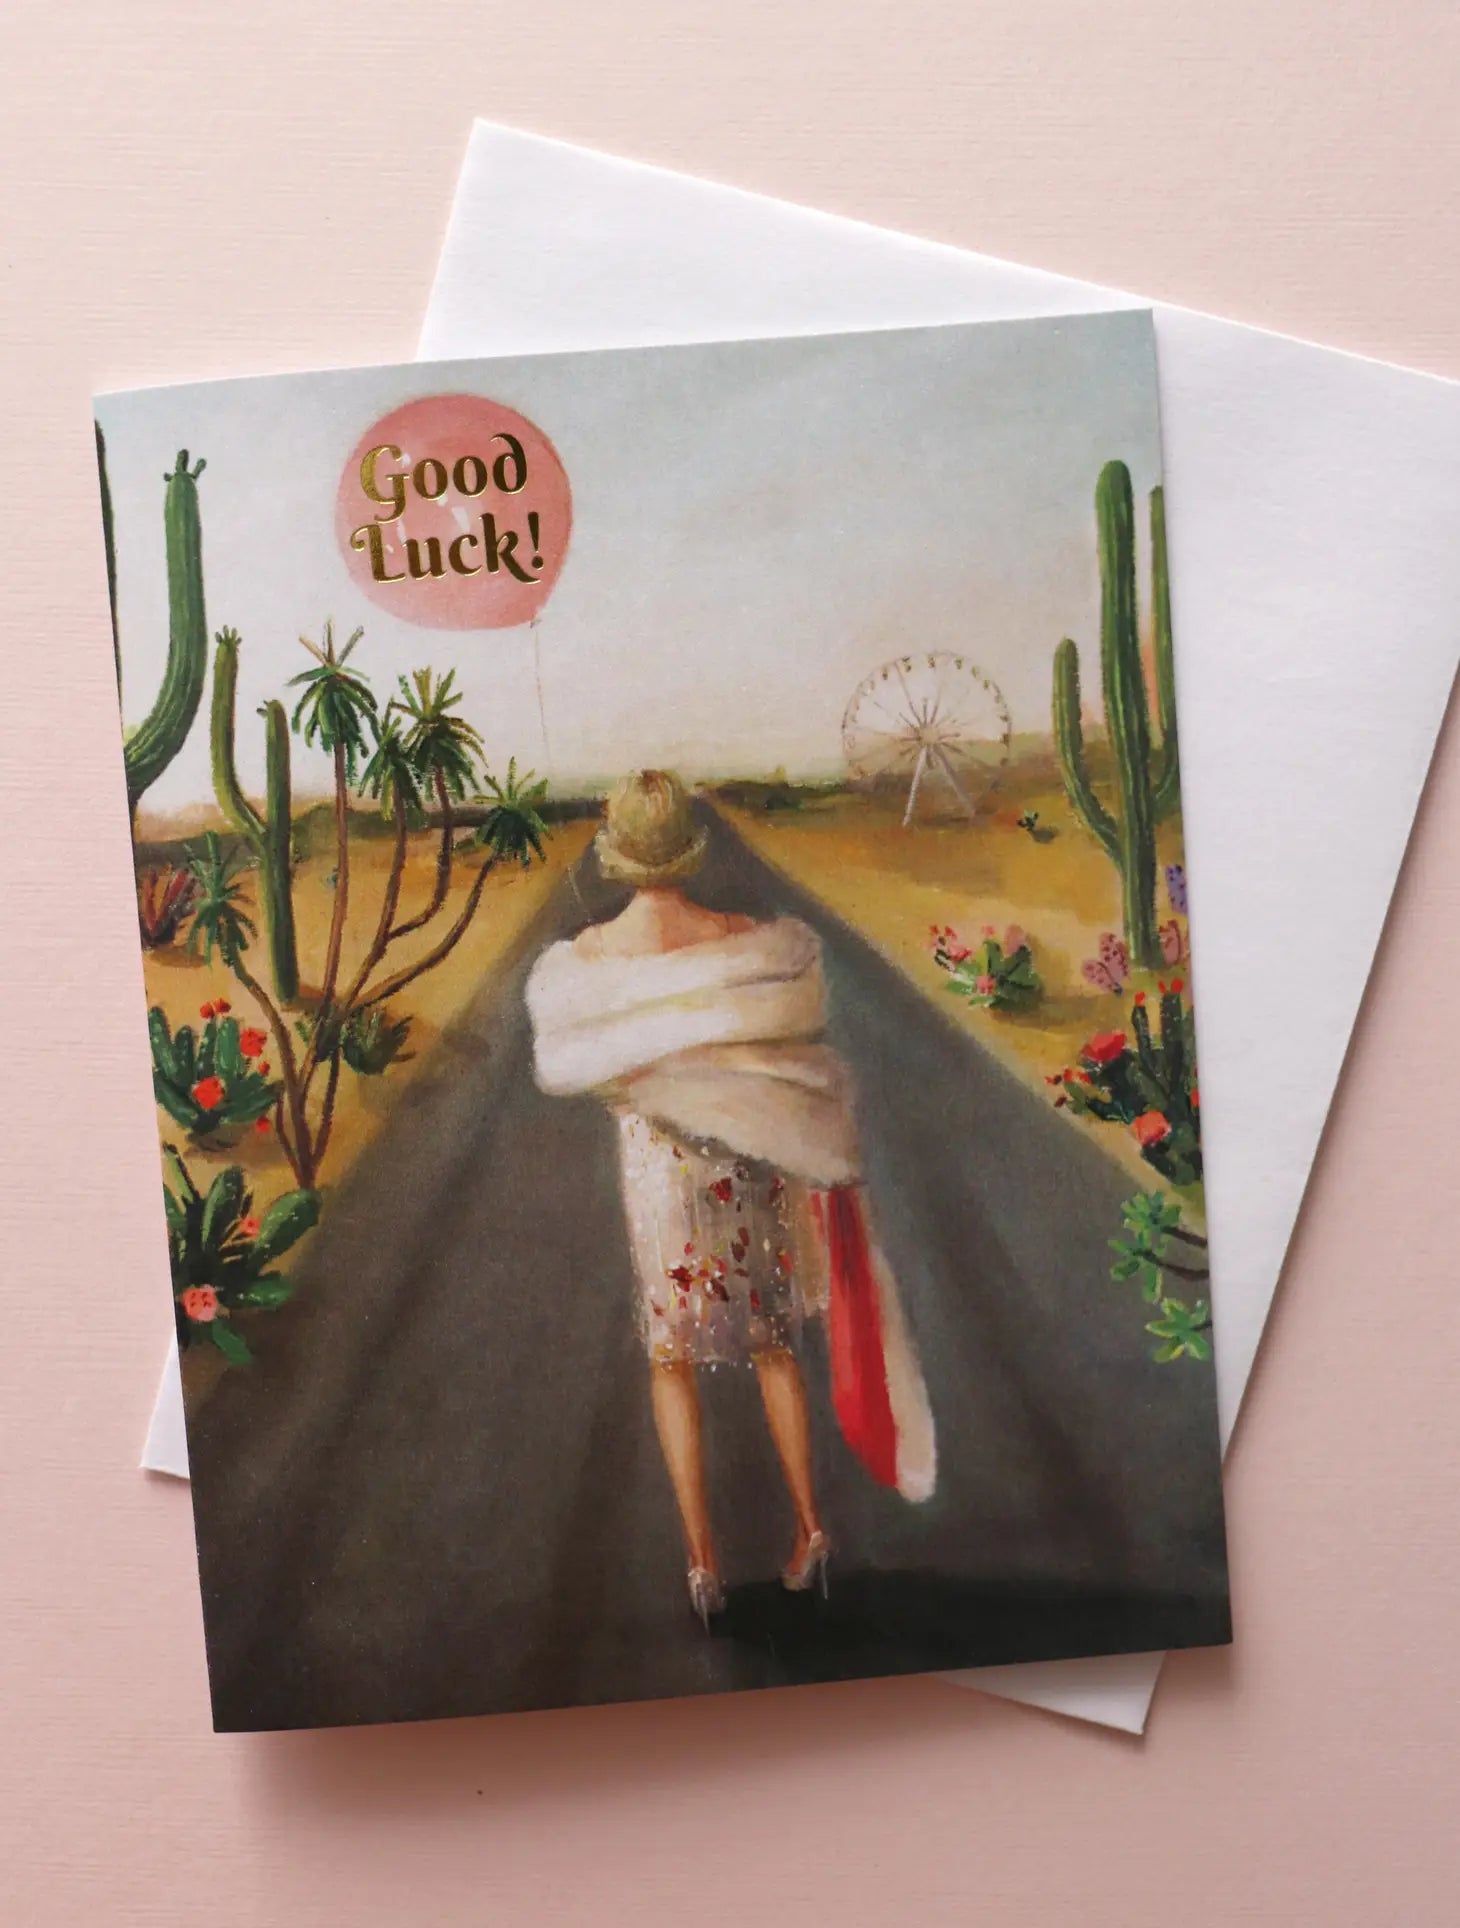 Lady Luck Card- Good Luck! - Moon Room Shop and Wellness